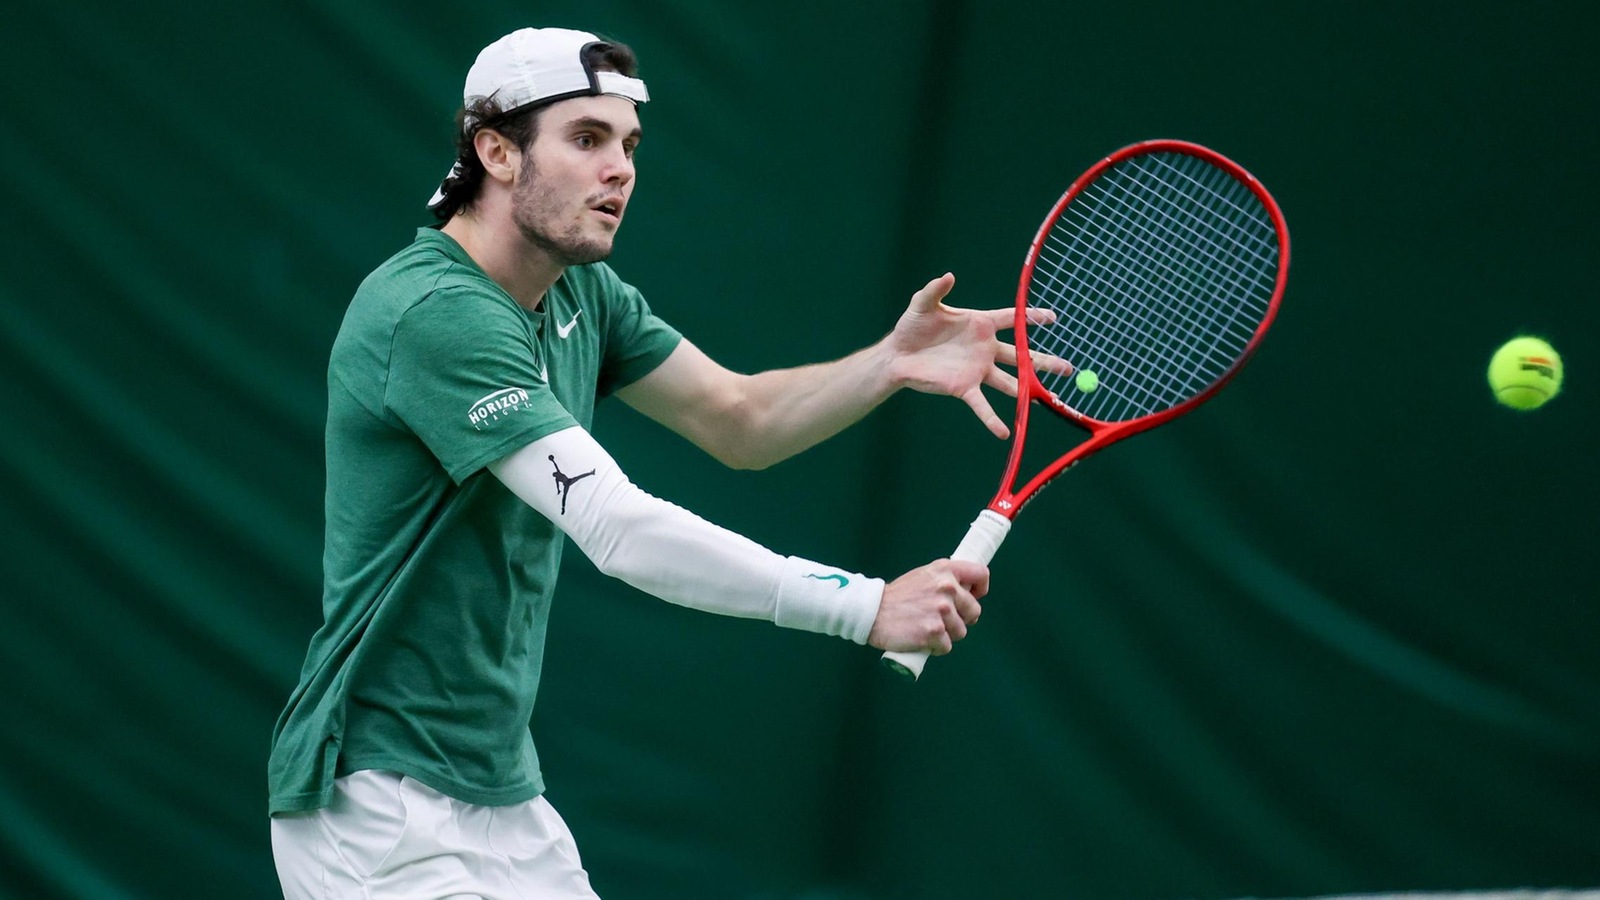 Cleveland State Men’s Tennis Finishes Regular Season With Perfect 8-0 #HLTennis Record